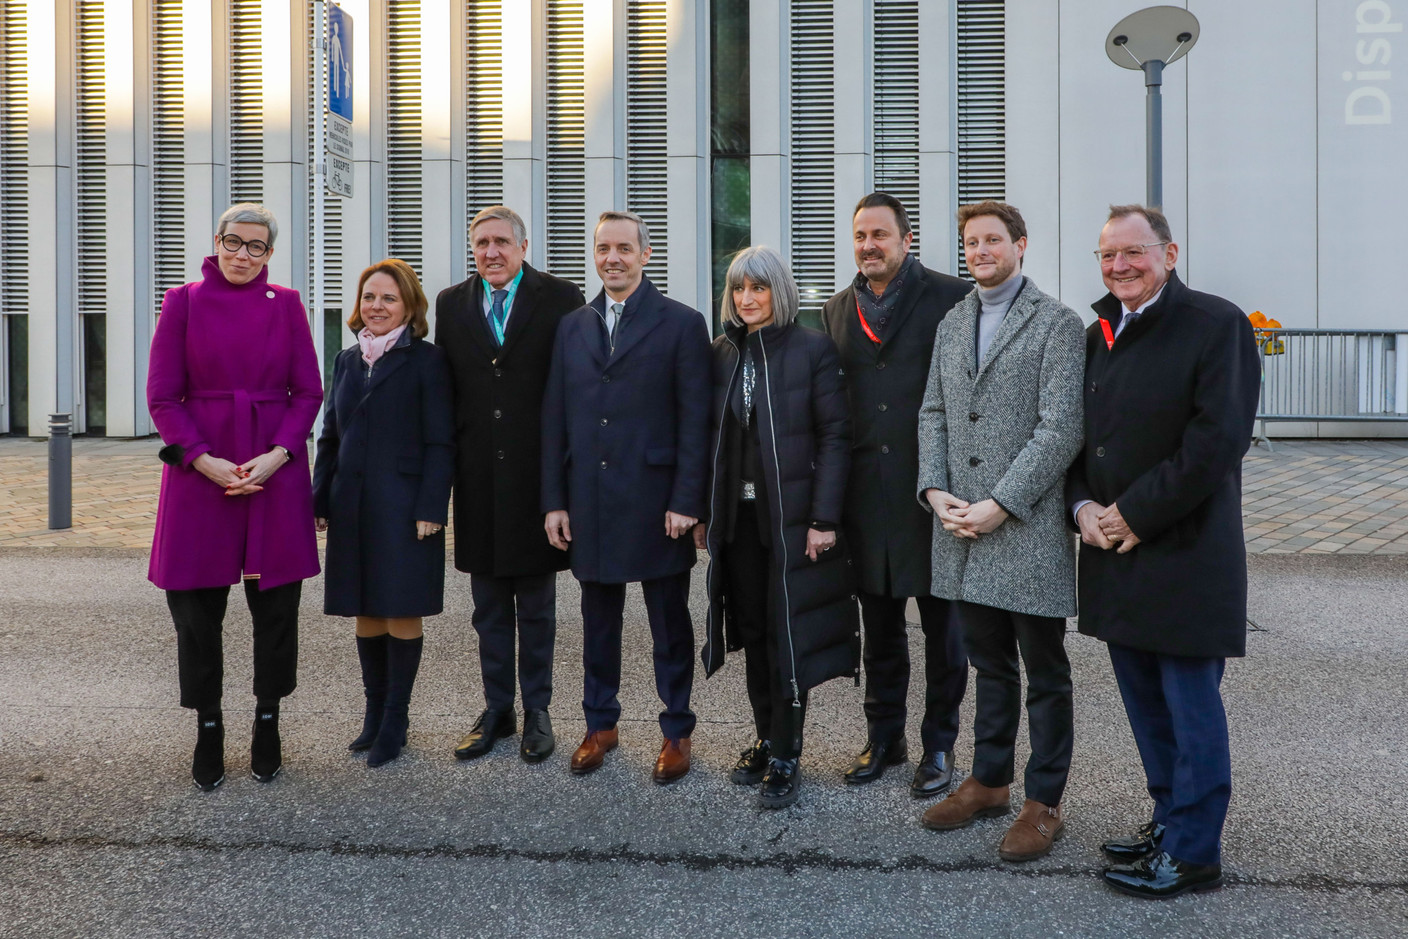 Many politicians were present to celebrate the opening of Esch2022. (Photo: Luc Deflorenne)